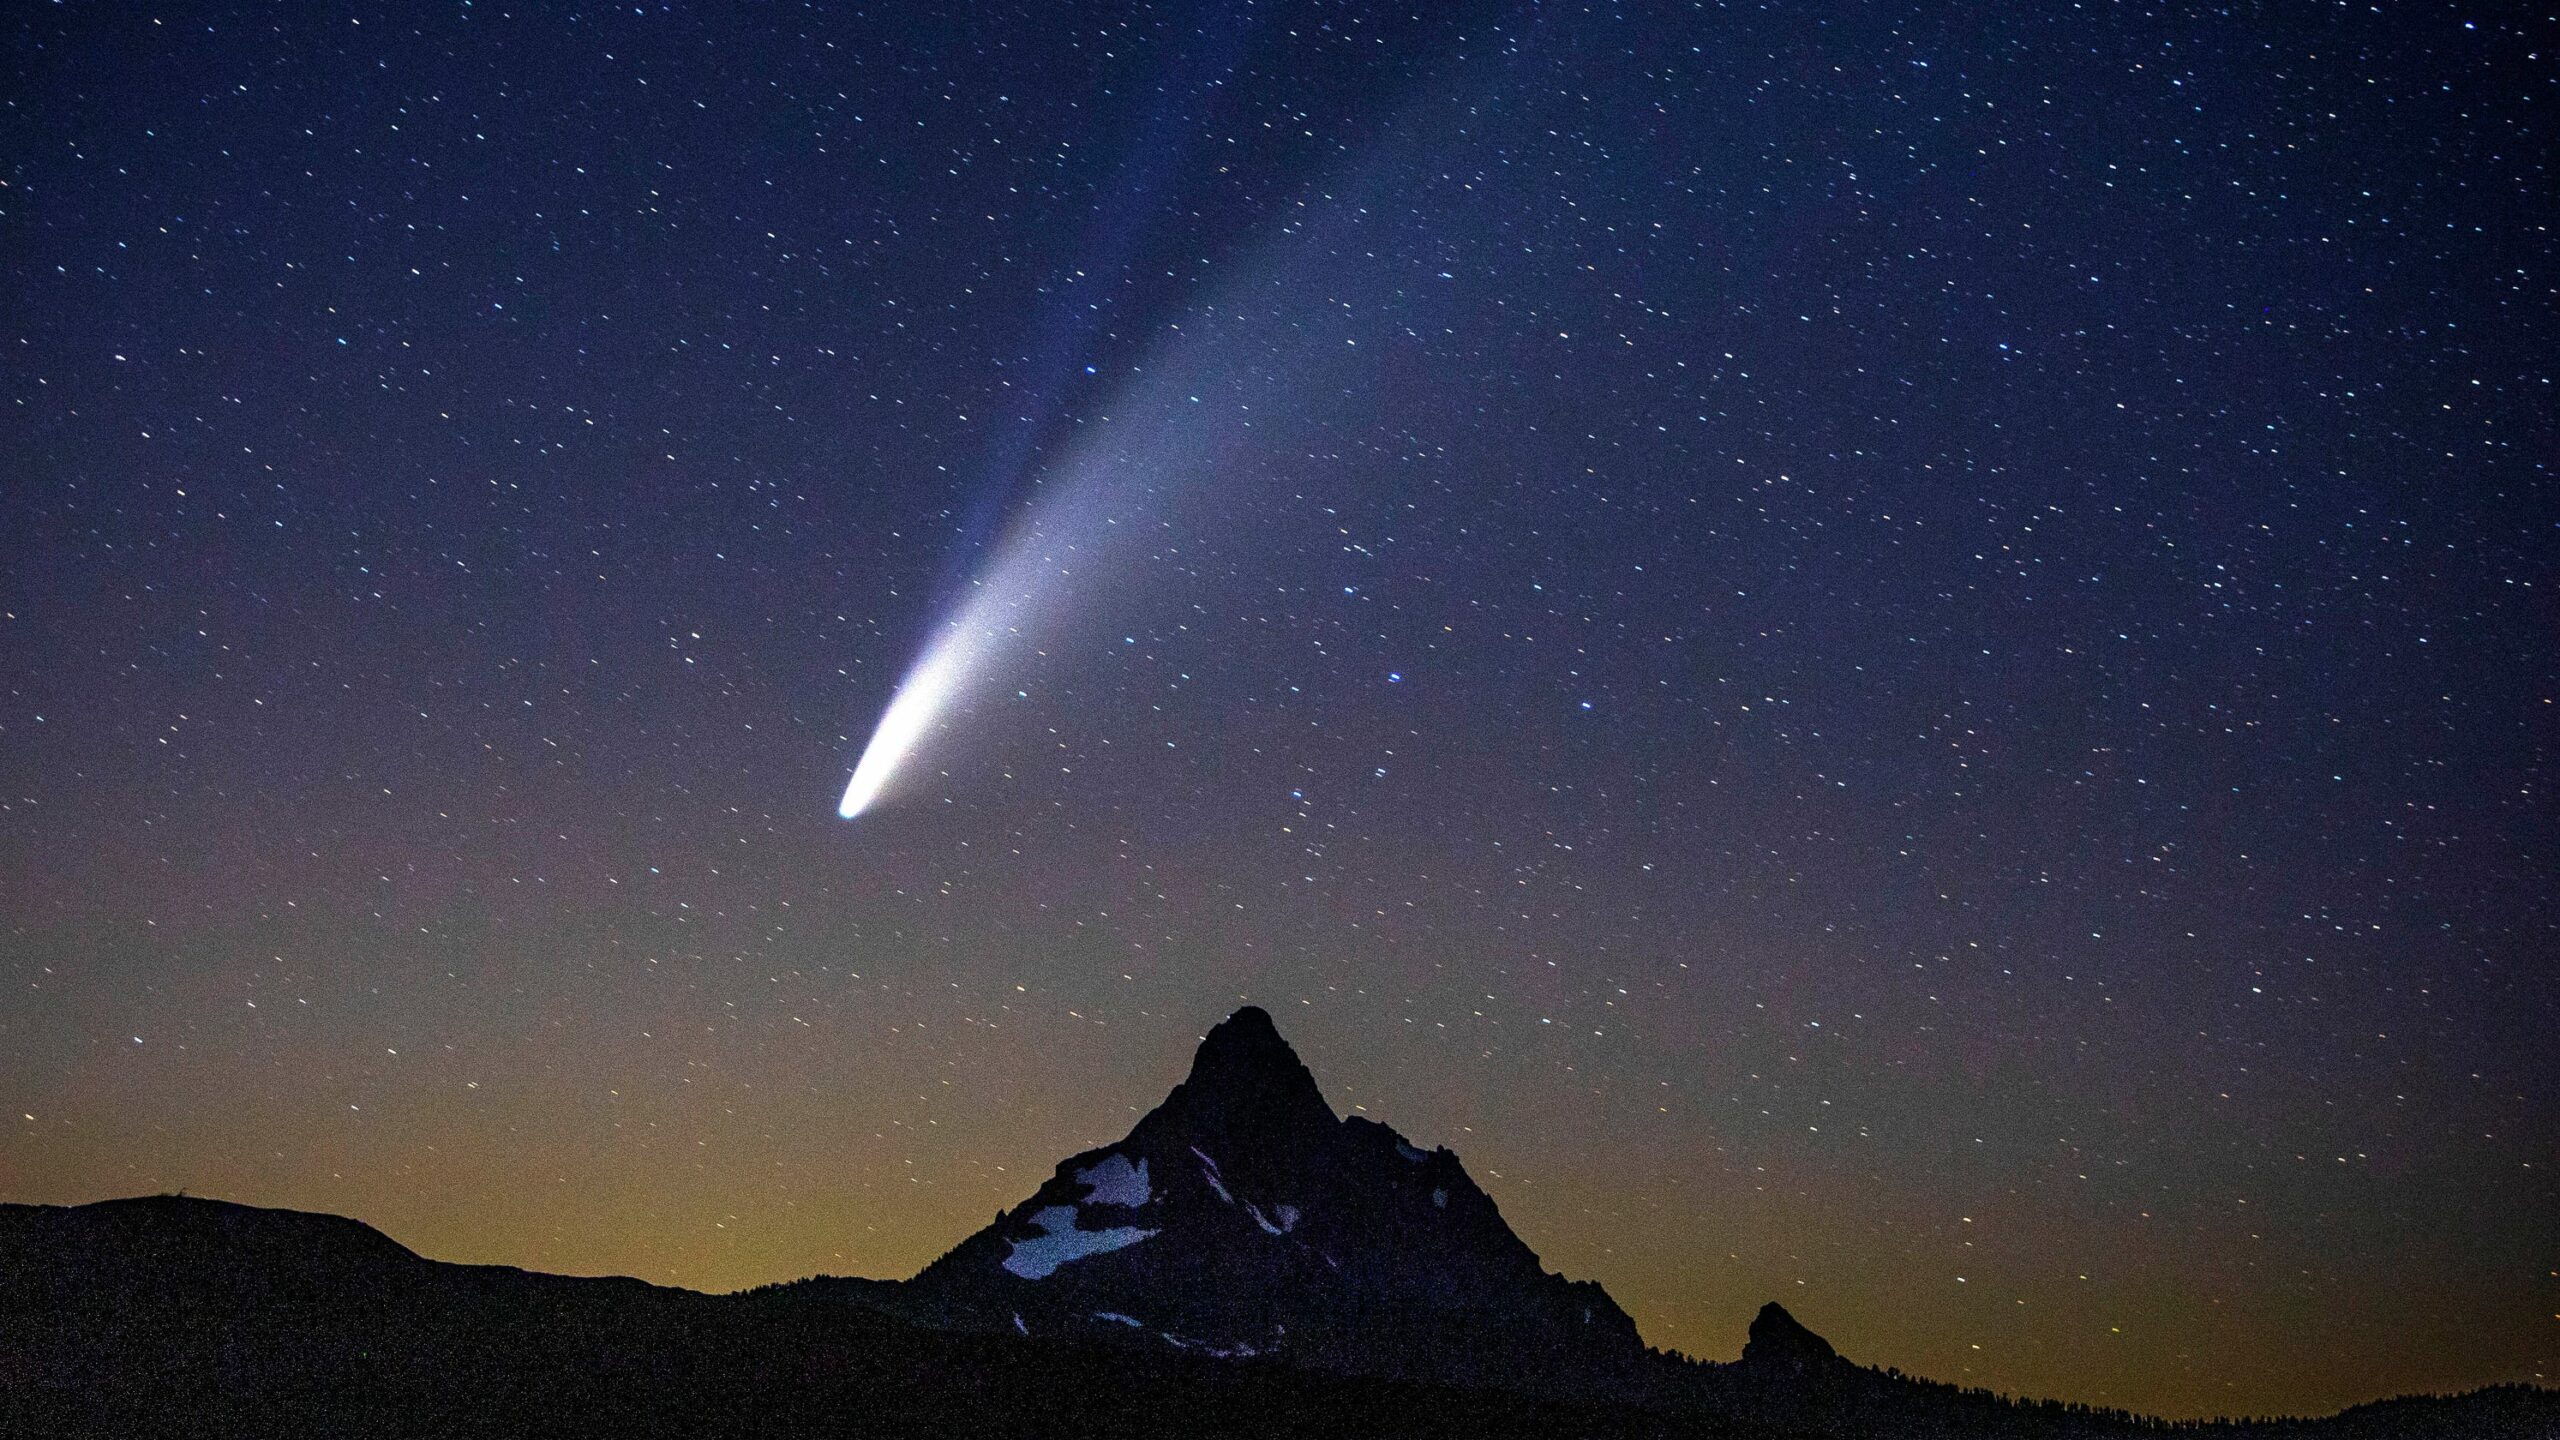 How to see it and find in the sky before it disappears